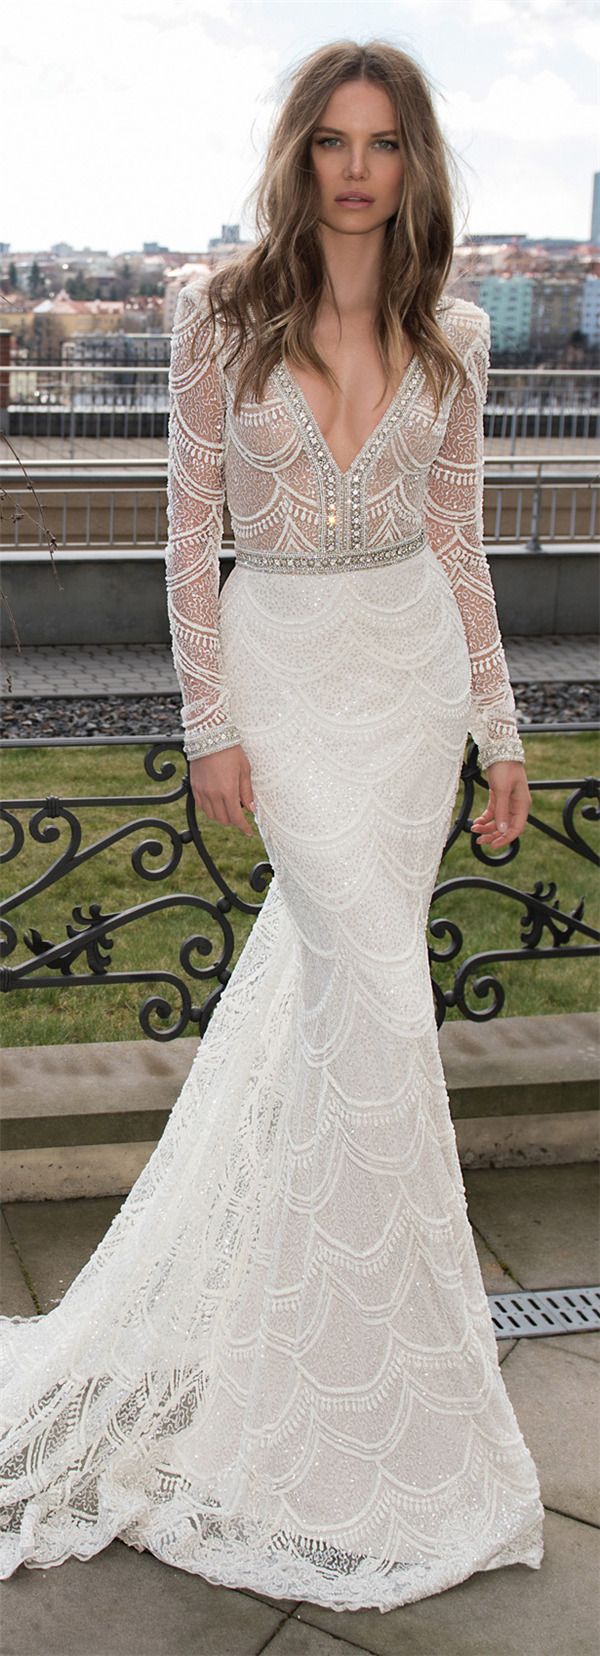 10 Pearl Embellished Wedding Gowns To Die For 3534